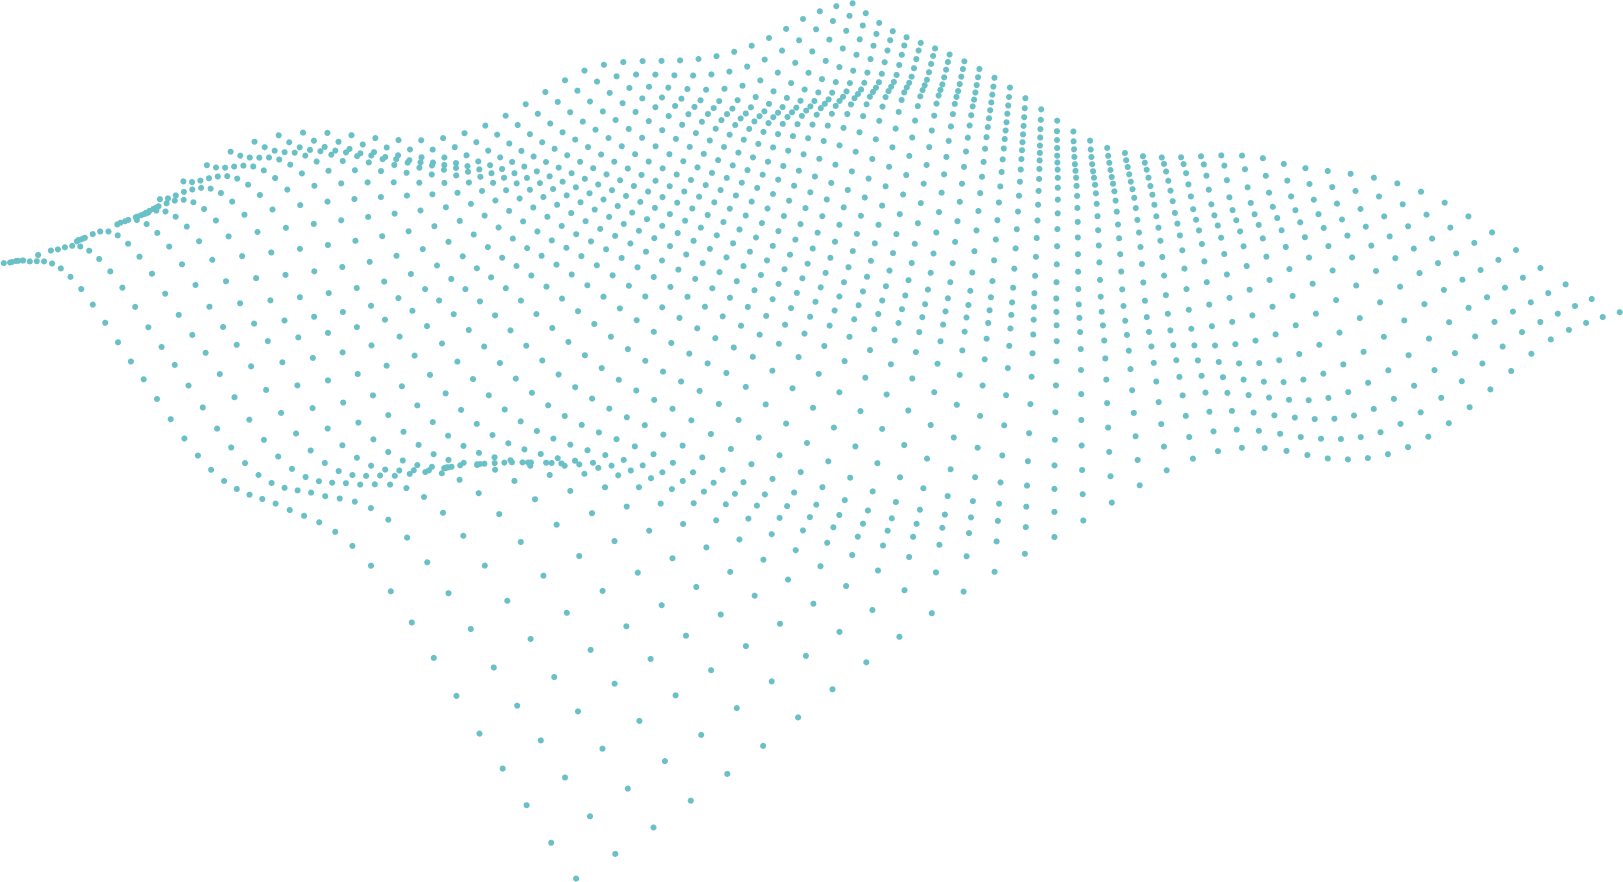 Wavy square in dots